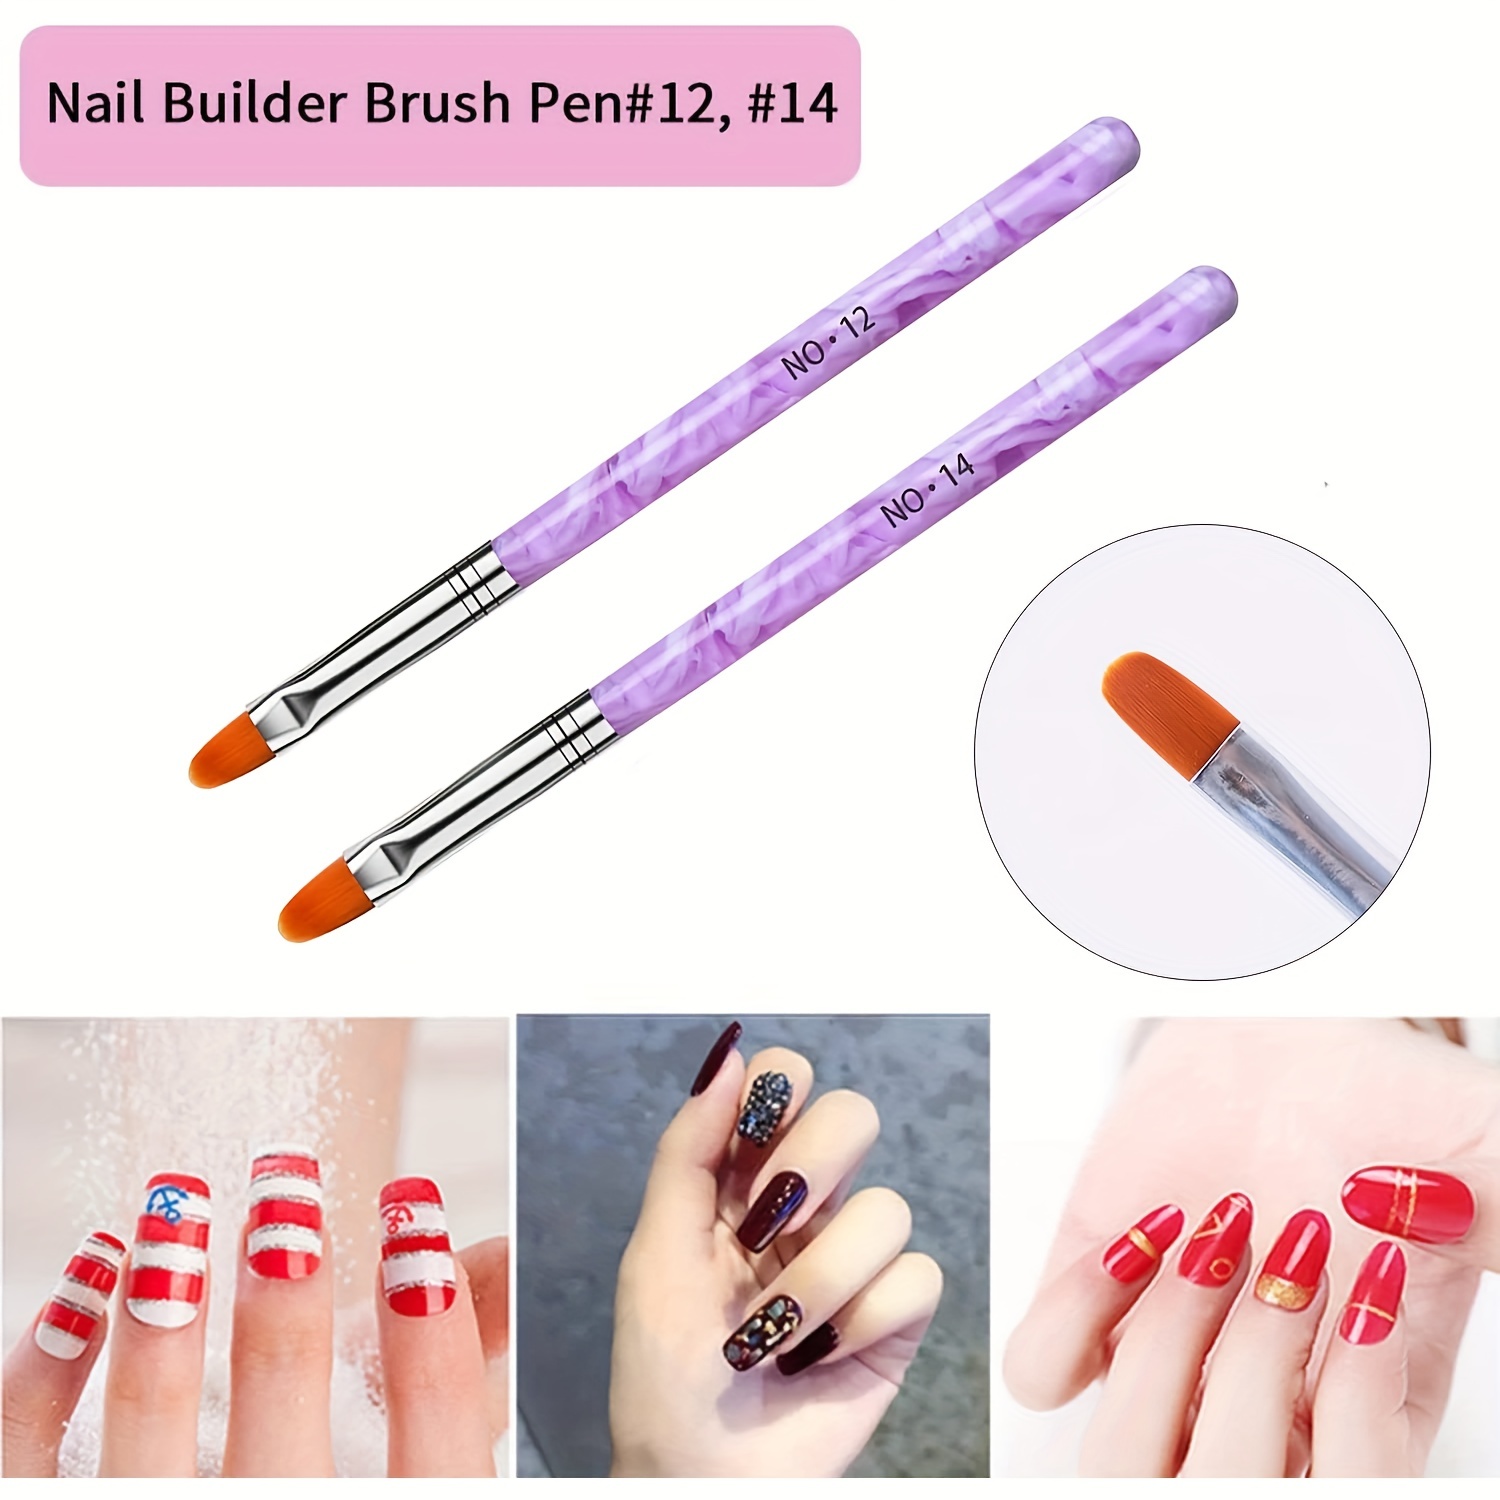 Nail Art Brushes Set, Nail Art Design Tools, 3d Builder Nail Gel Brush,  Professional Acrylic Nail Drawing Pen, Nail Art Brush For Salon At Home  Manicure, Shop Now For Limited-time Deals